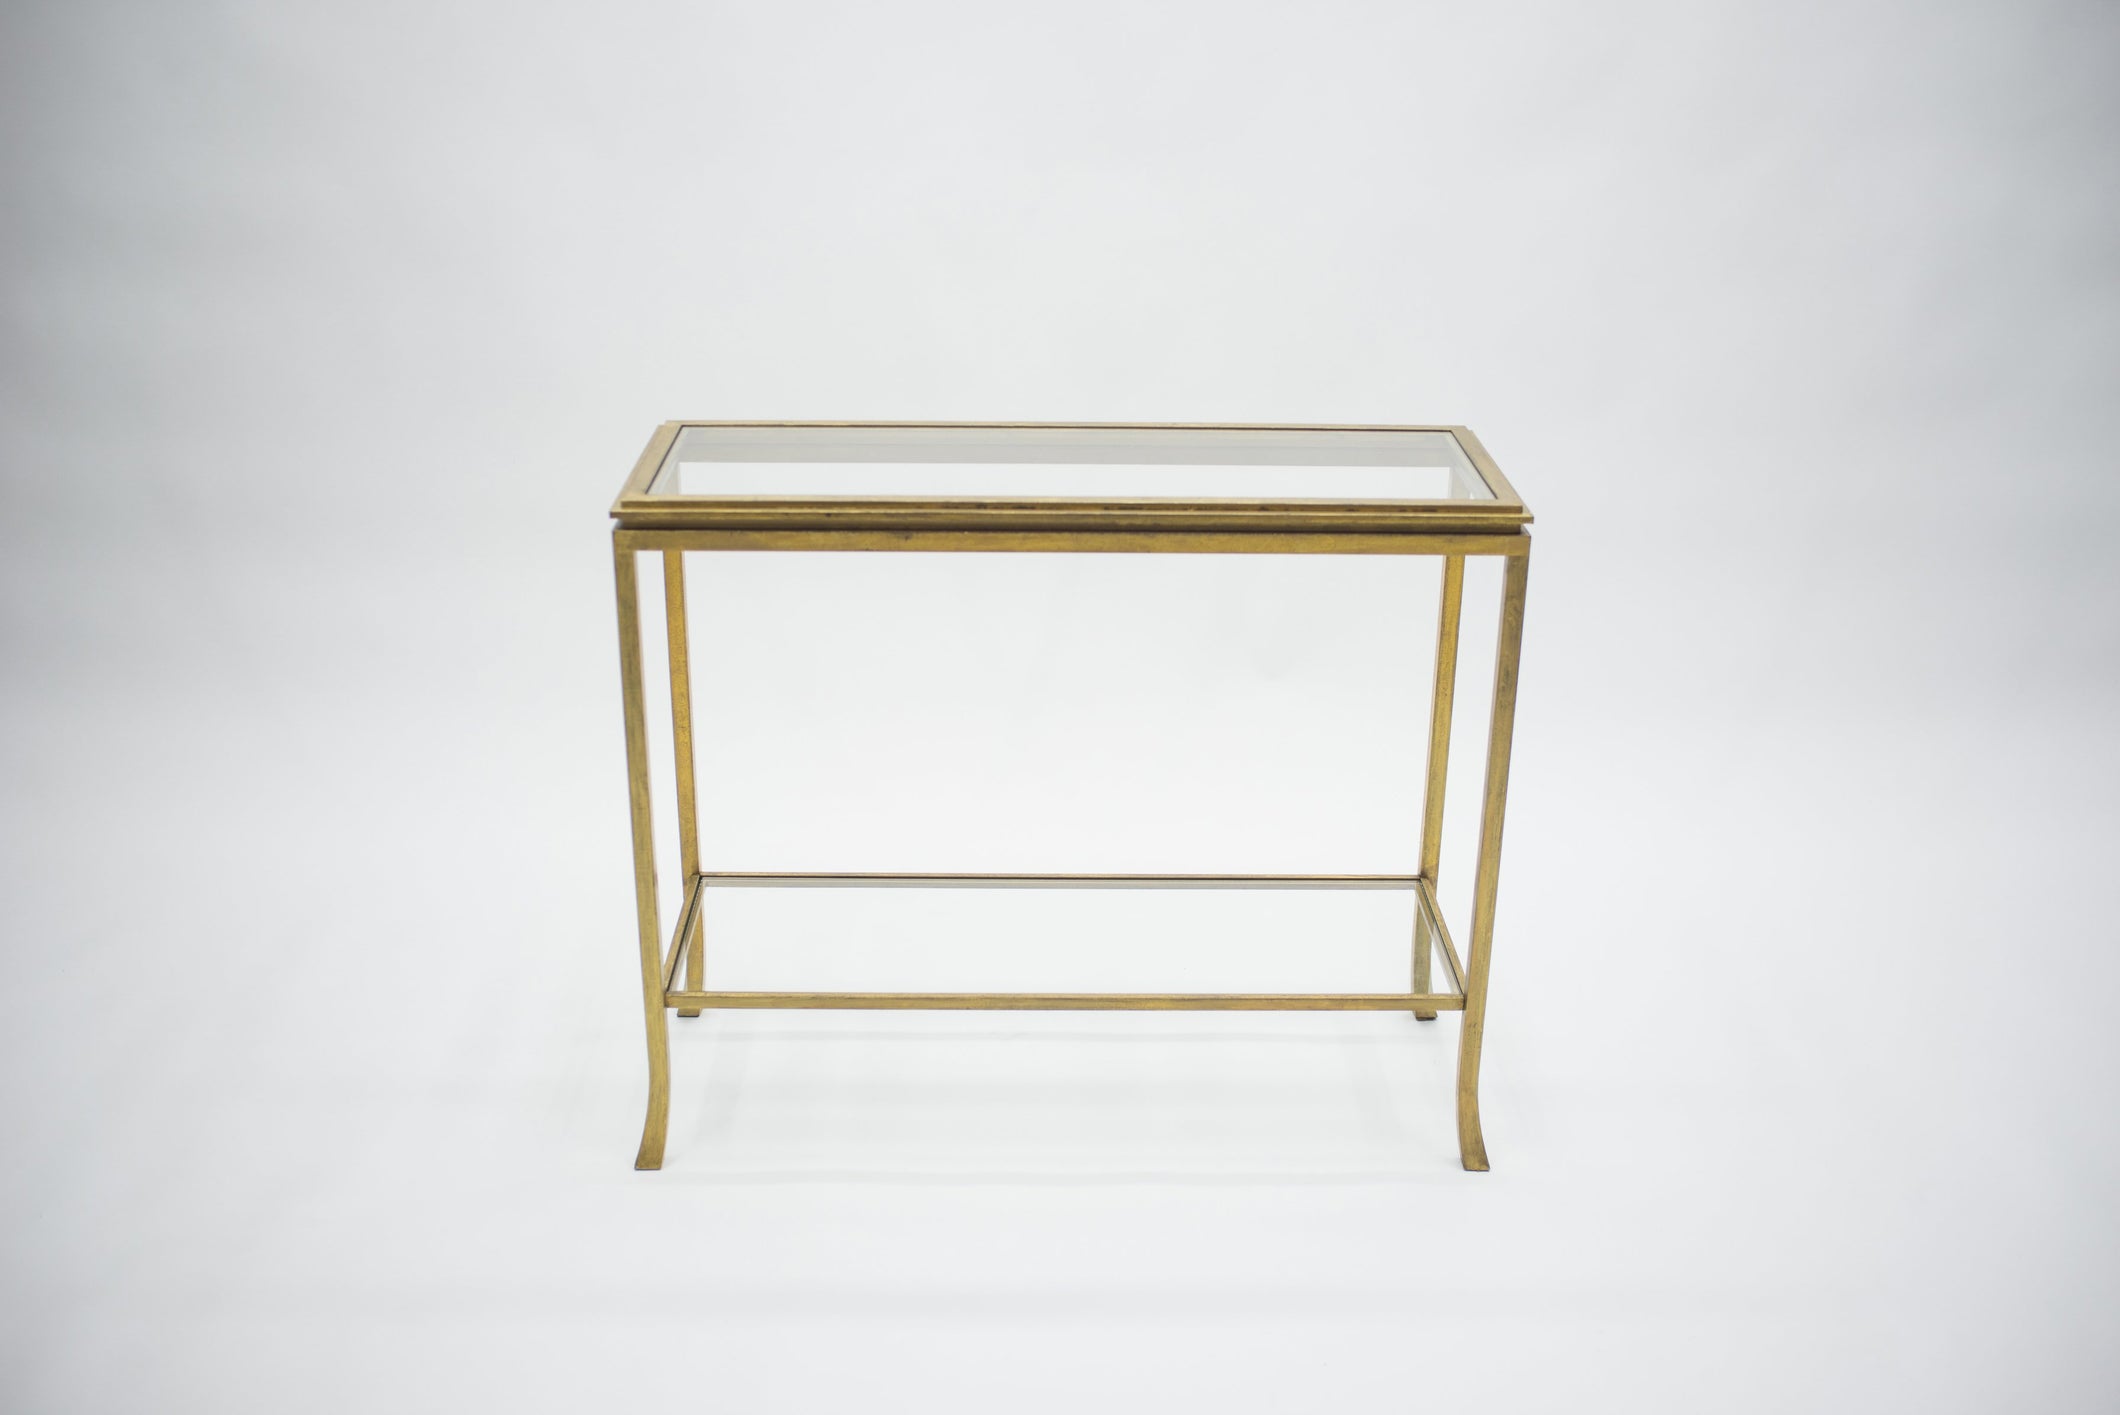 Rare Mid-century Roger Thibier gilt wrought iron gold leaf console table 1960s